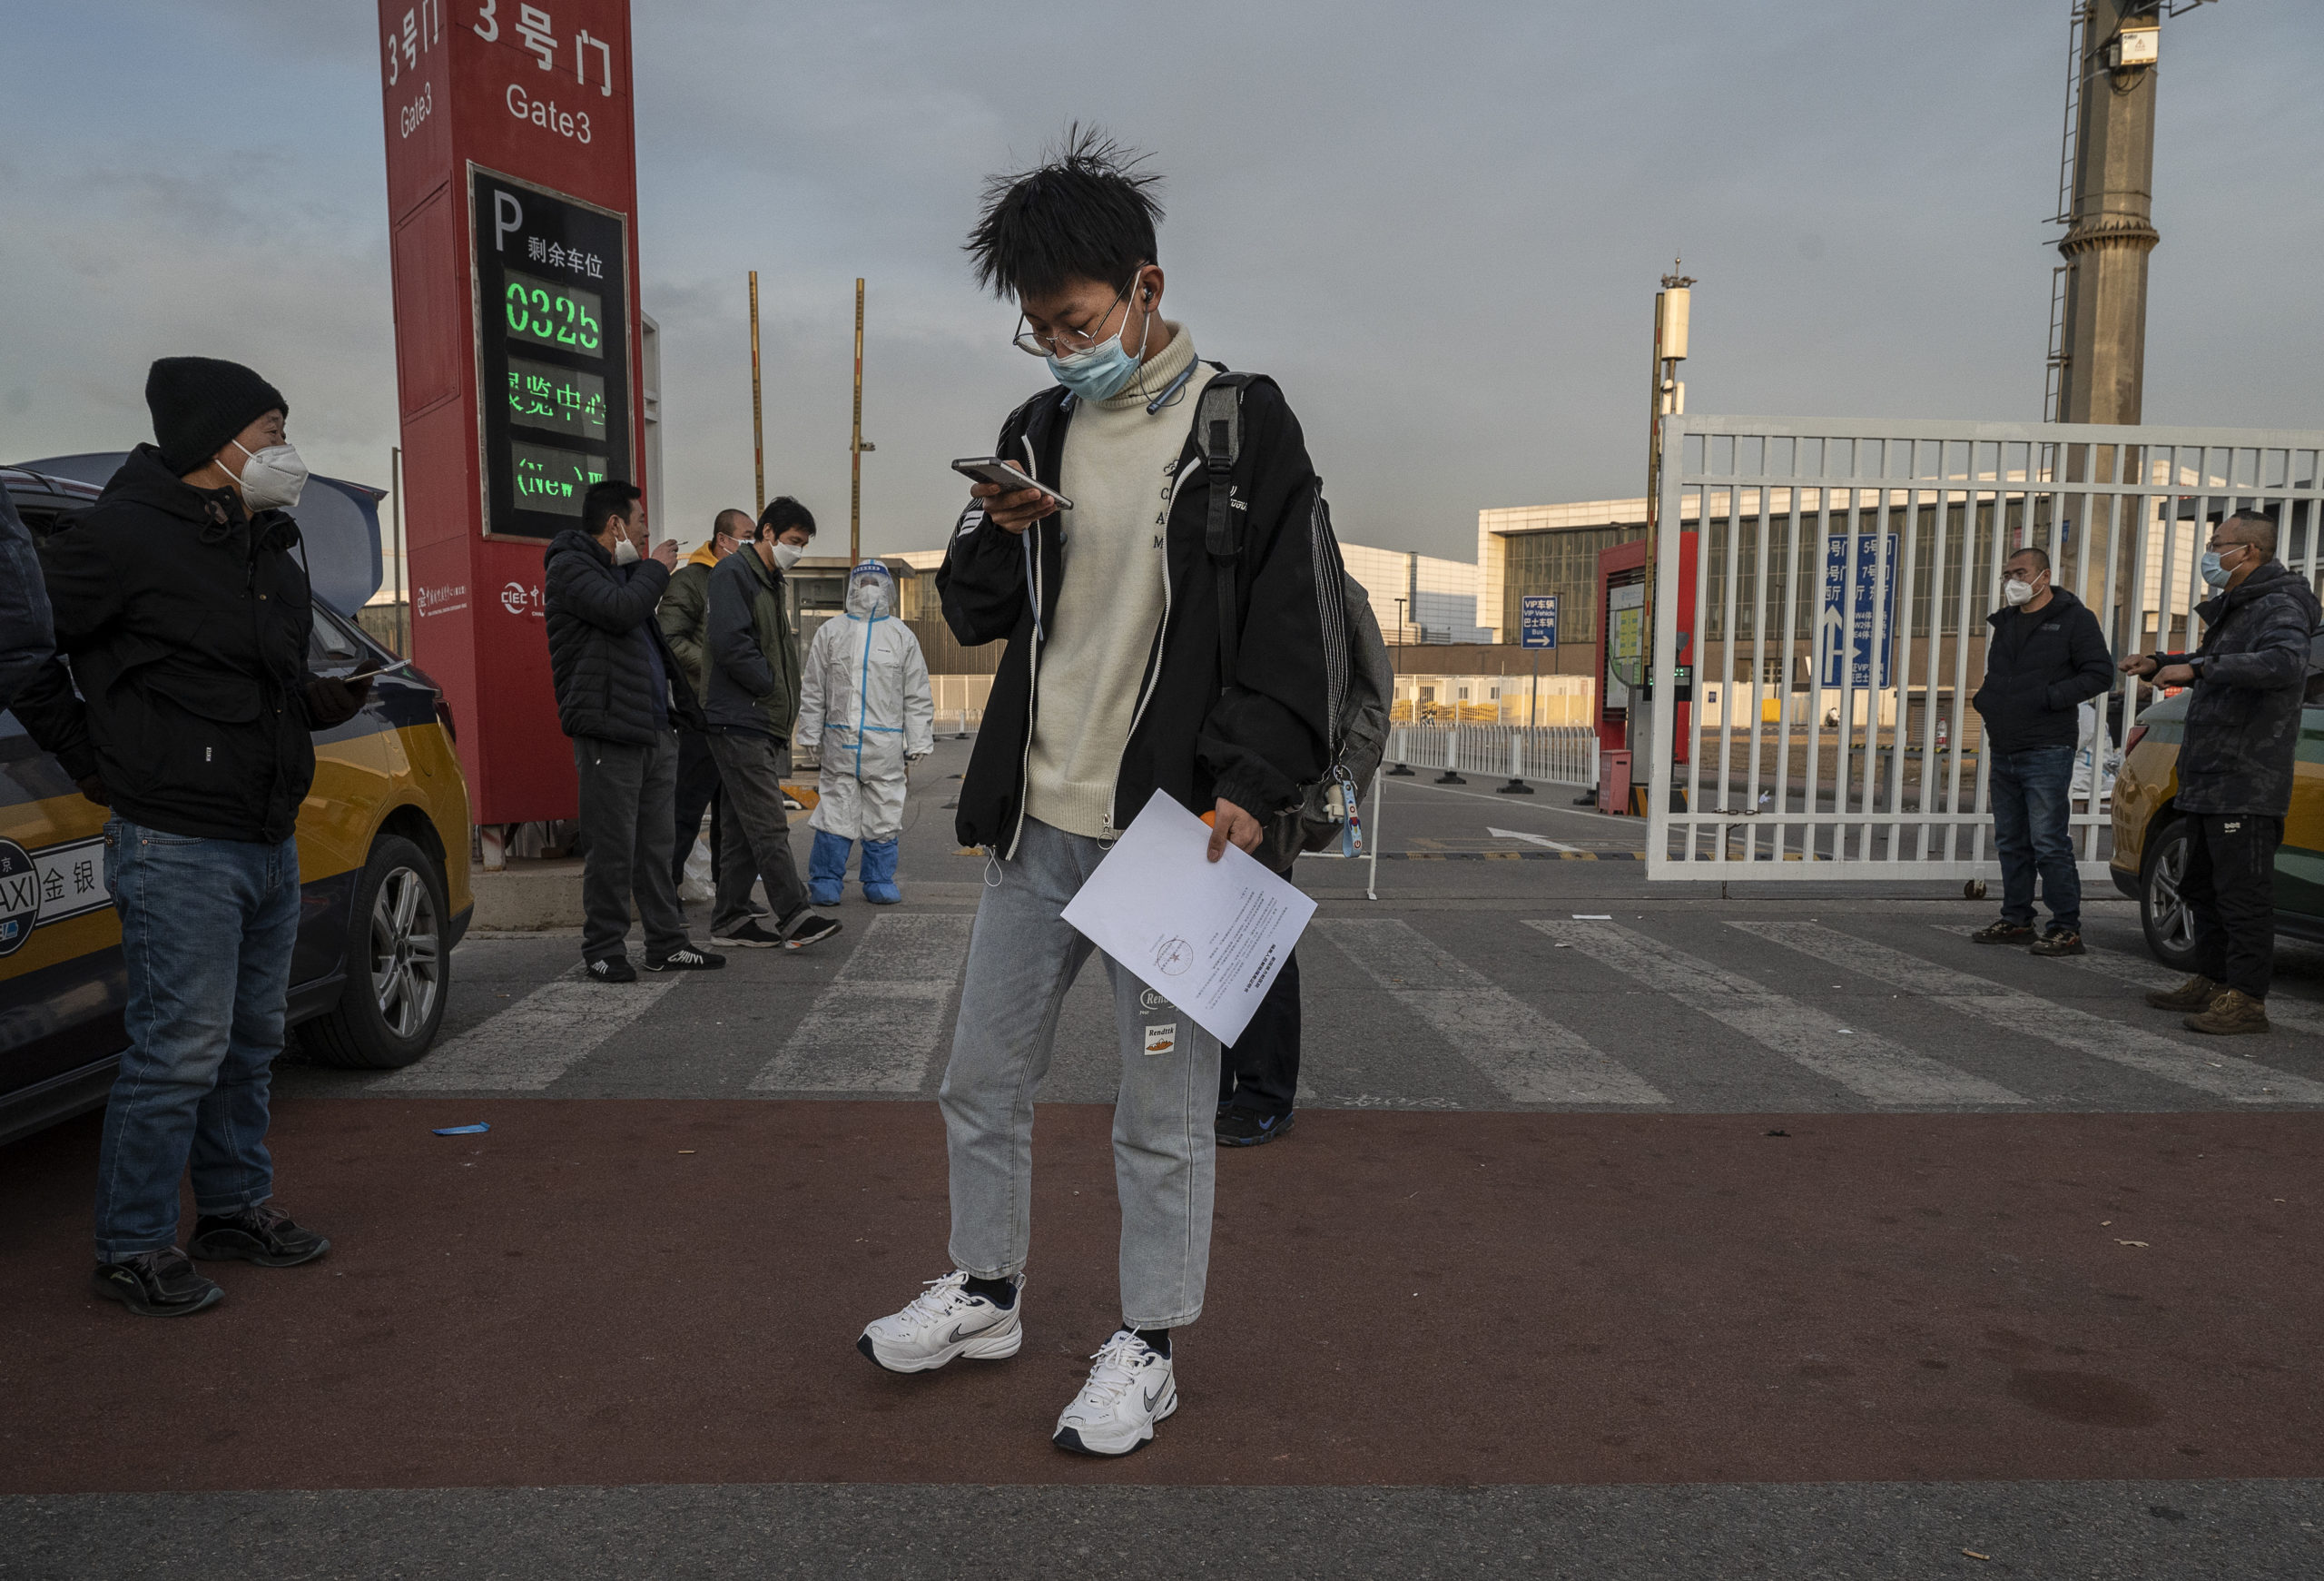 BEIJING, CHINA - DECEMBER 07: A man carries his release papers as he leaves after being released from a government quarantine facility on December 7, 2022 in Beijing, China. As part of a 10 point directive, China's government announced Wednesday that people with COVID-19 who have mild or are asymptomatic will be permitted to quarantine at home instead of being taken to a makeshift facility, a major shift in its zero COVID policy. 